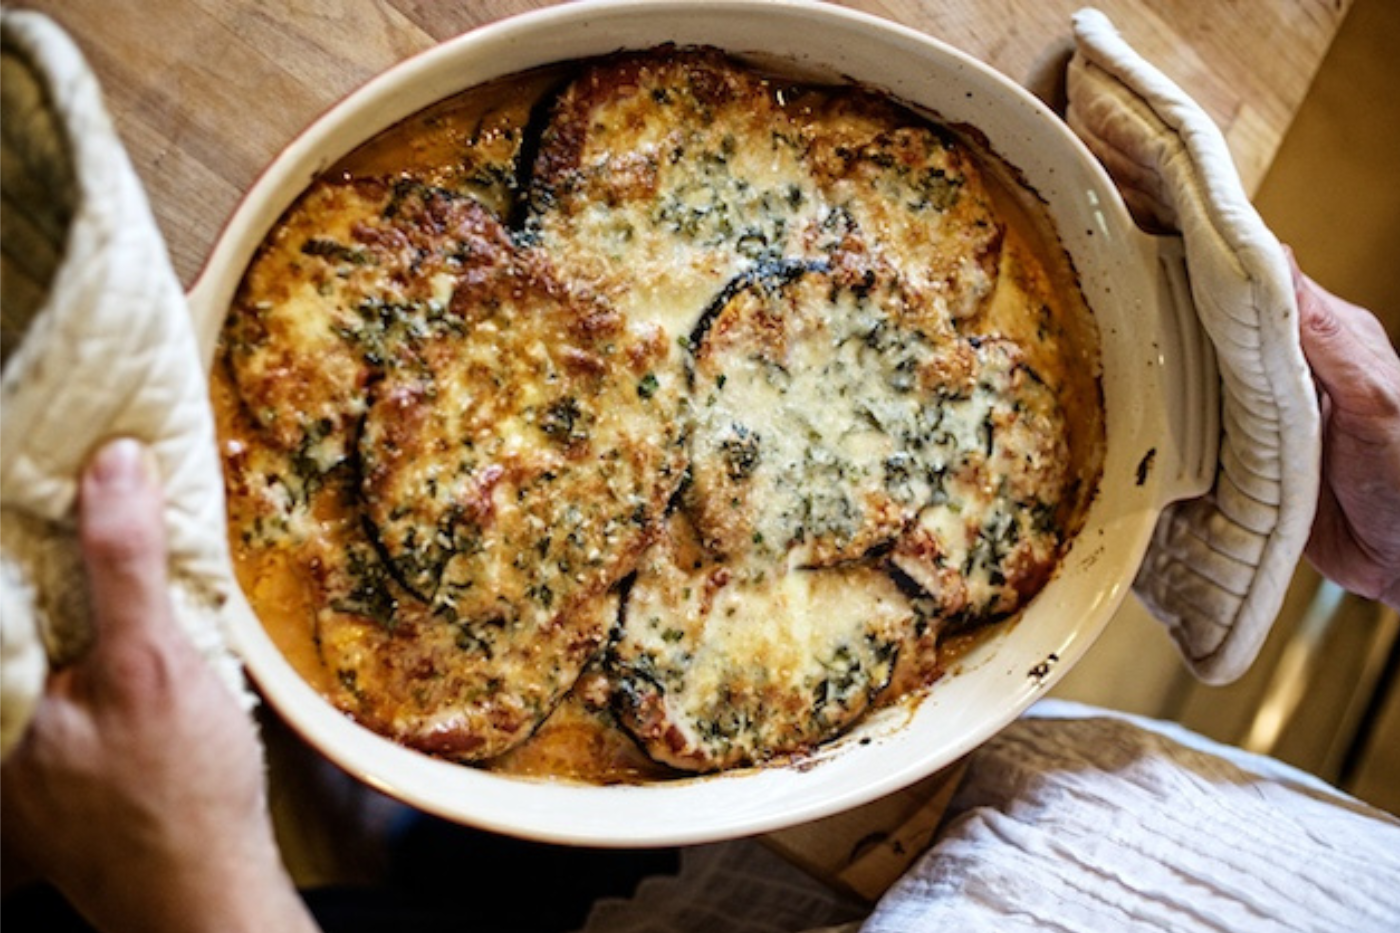 Lettuce Grow - Eggplant Gratin with Herbs and Creme Fraiche